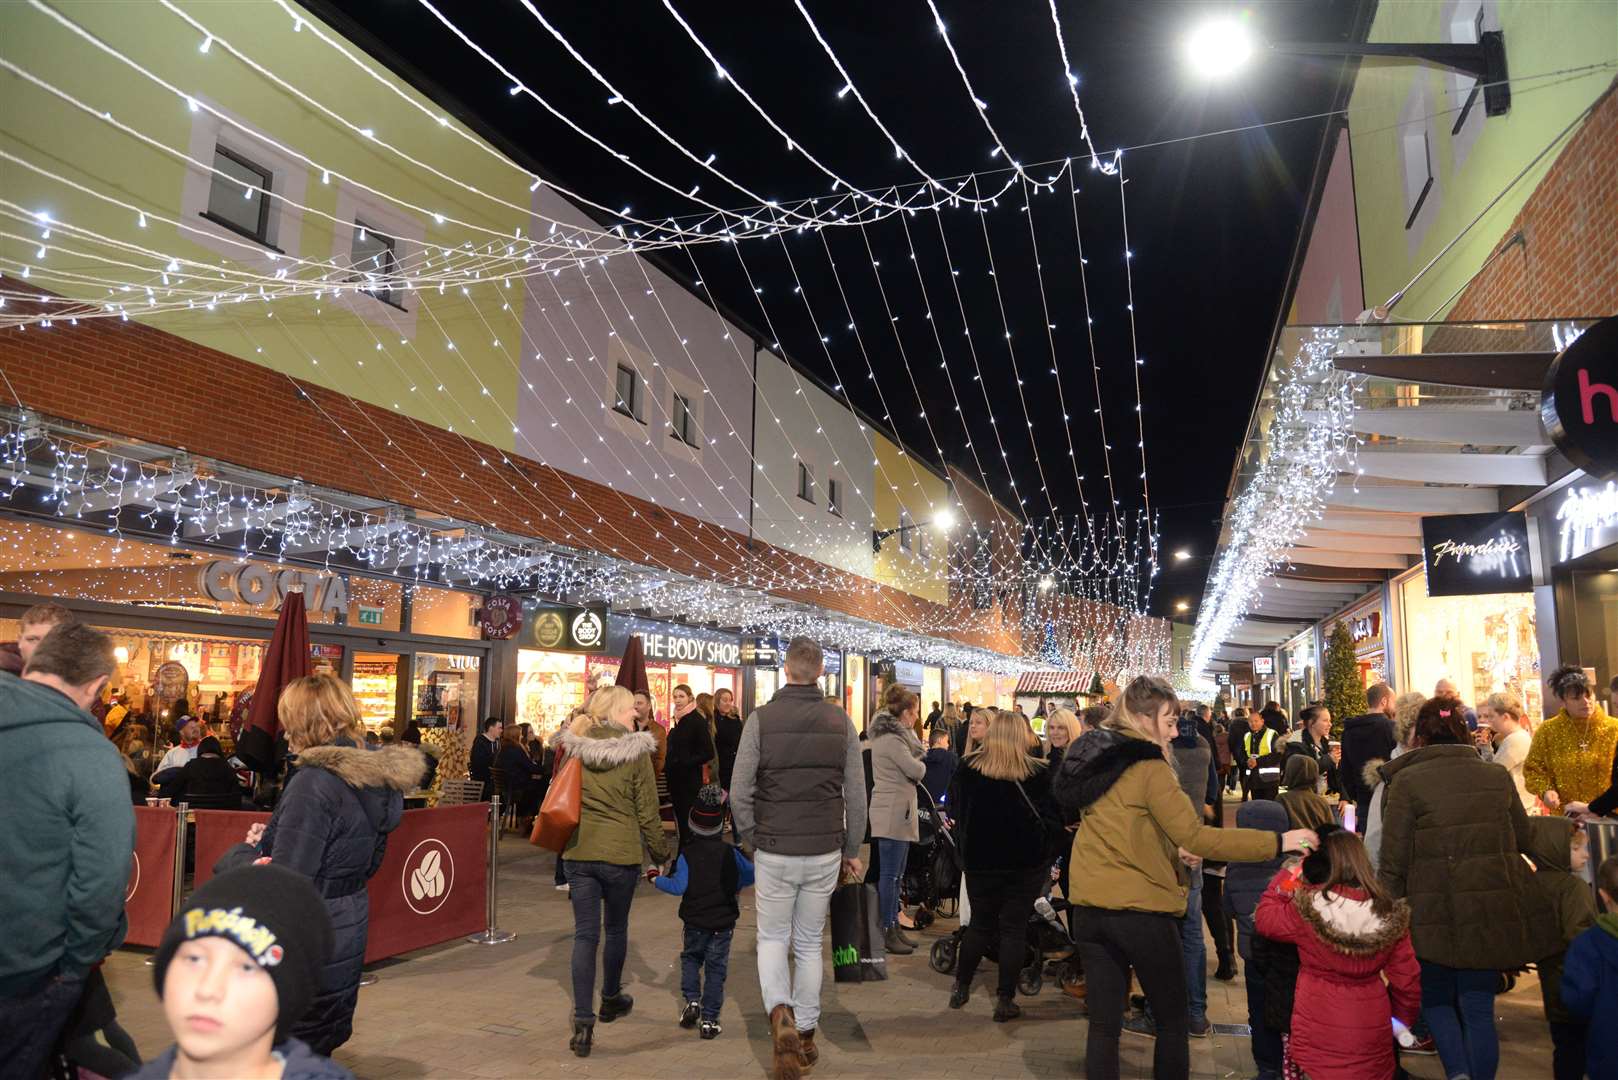 Fremlin Walk will have several late-night shopping days